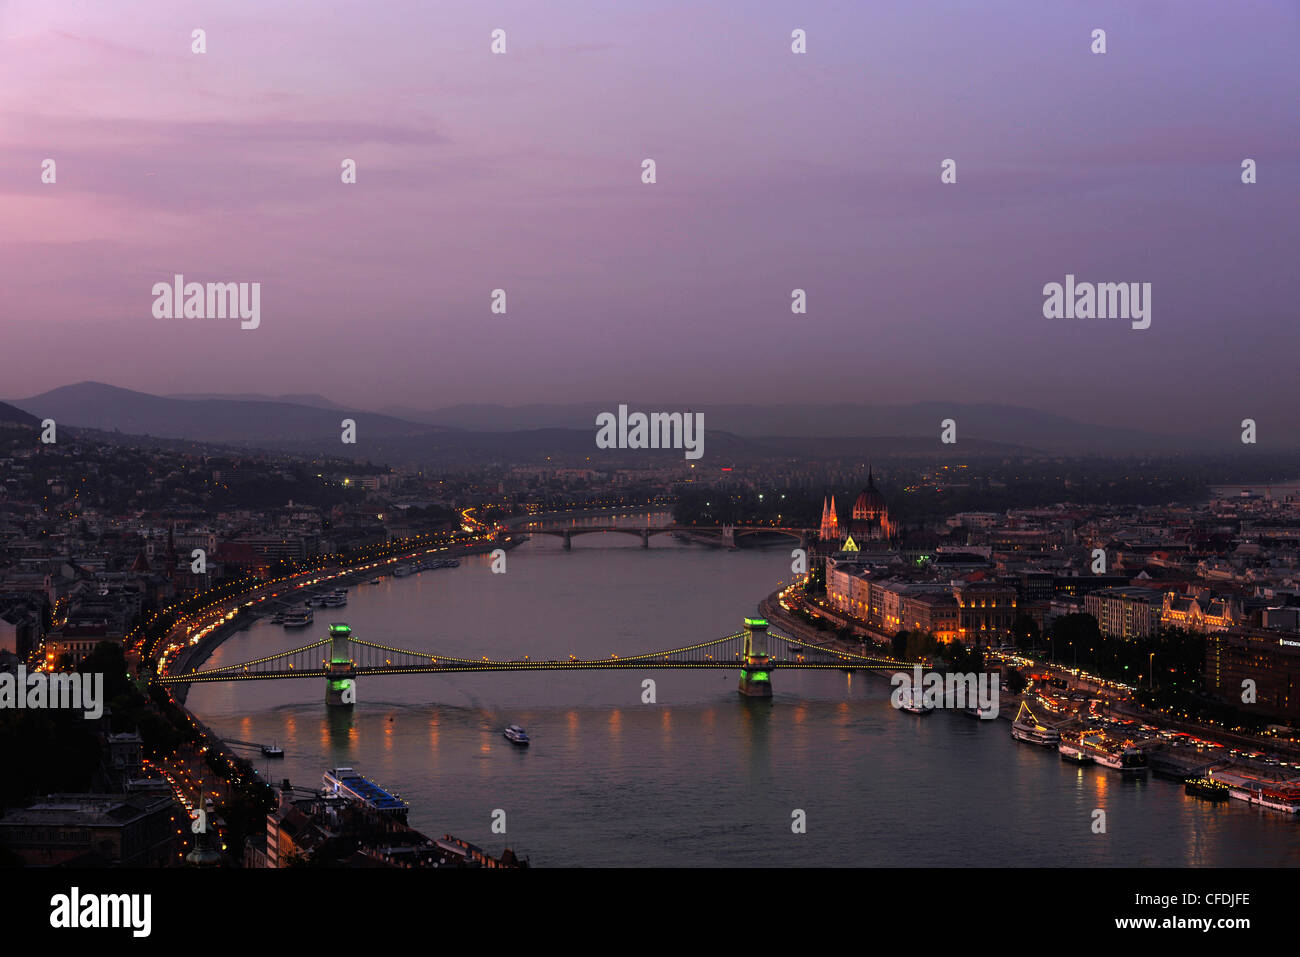 View over Castle hill, Danube river and Chain Bridge in the evening, Budapest, Hungary, Europe Stock Photo